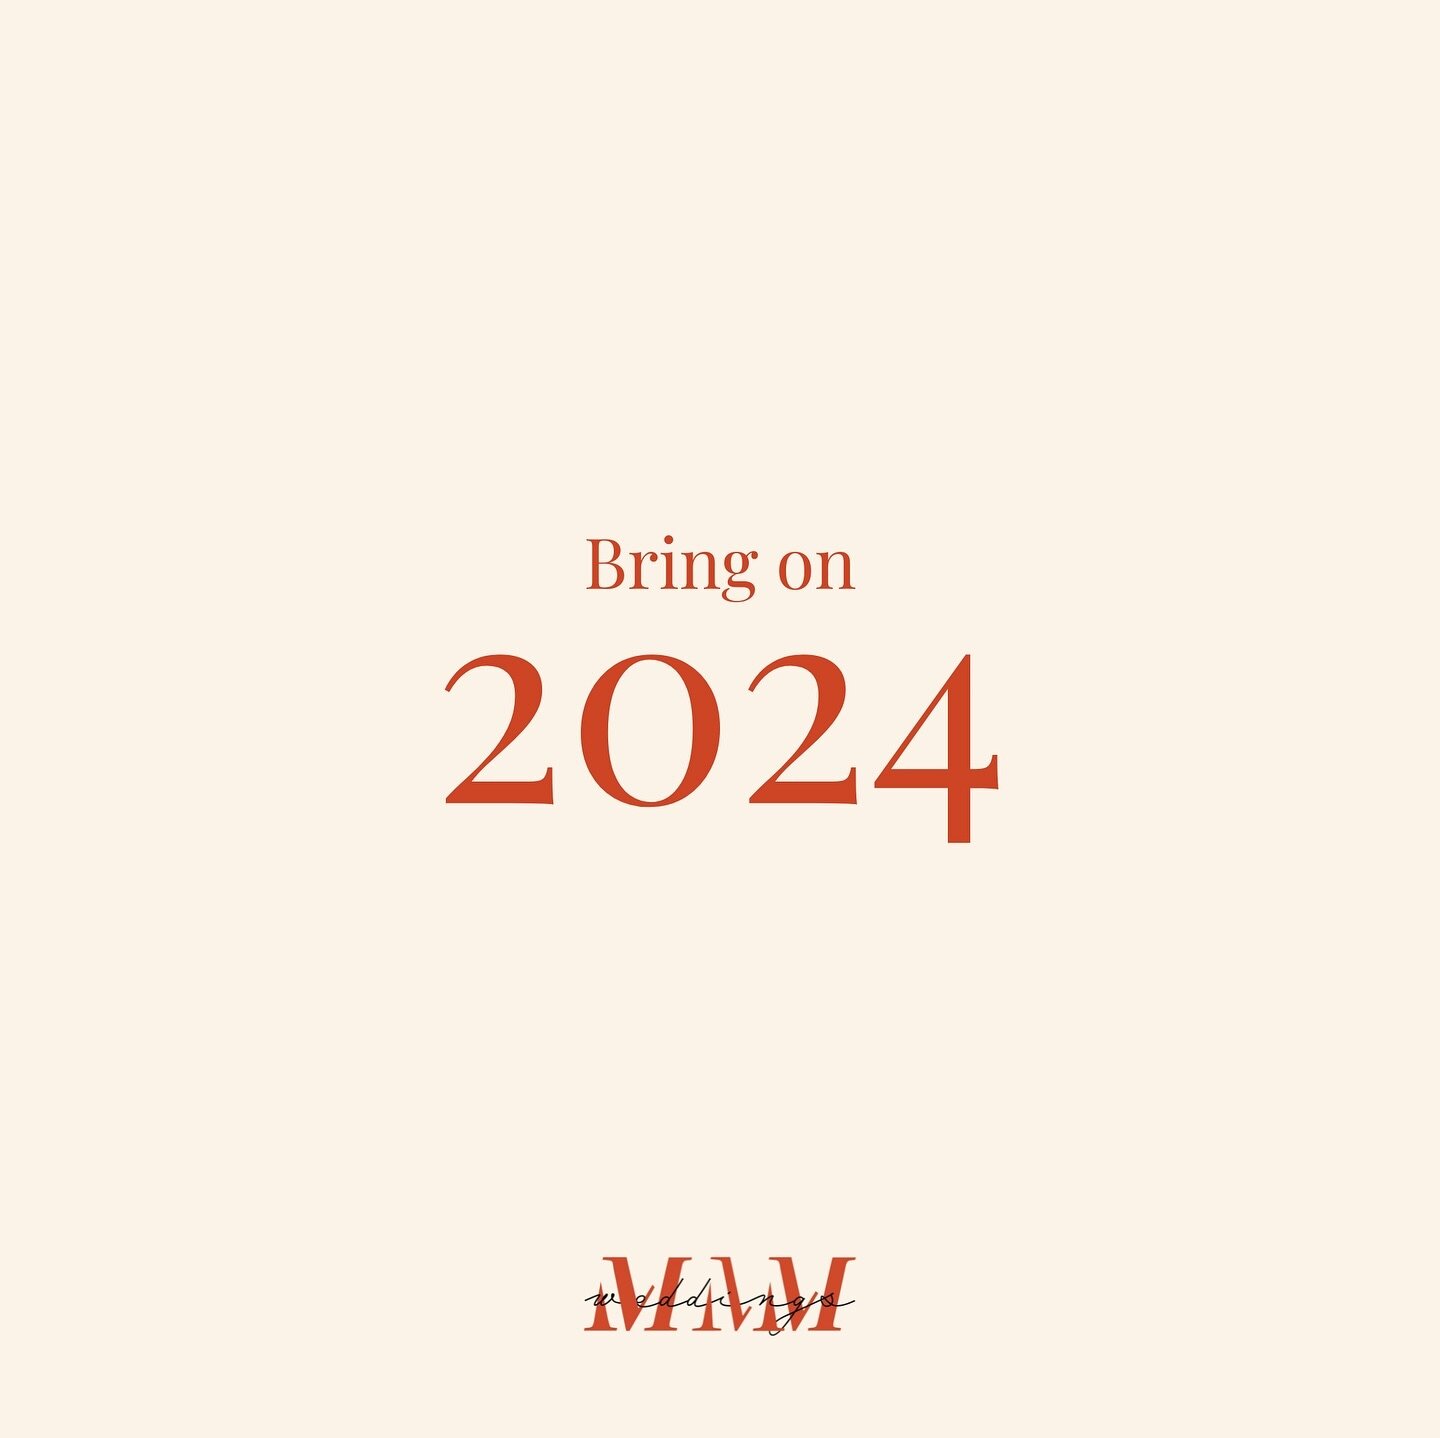 Ready to make 2024 an unforgettable one! ✨

#weddingplanner #weddingplanning #geelongwedding #geelongweddingplanner #geelongweddings #marrymemurrihy #geelongbride #geelongbrides #geelongexpo